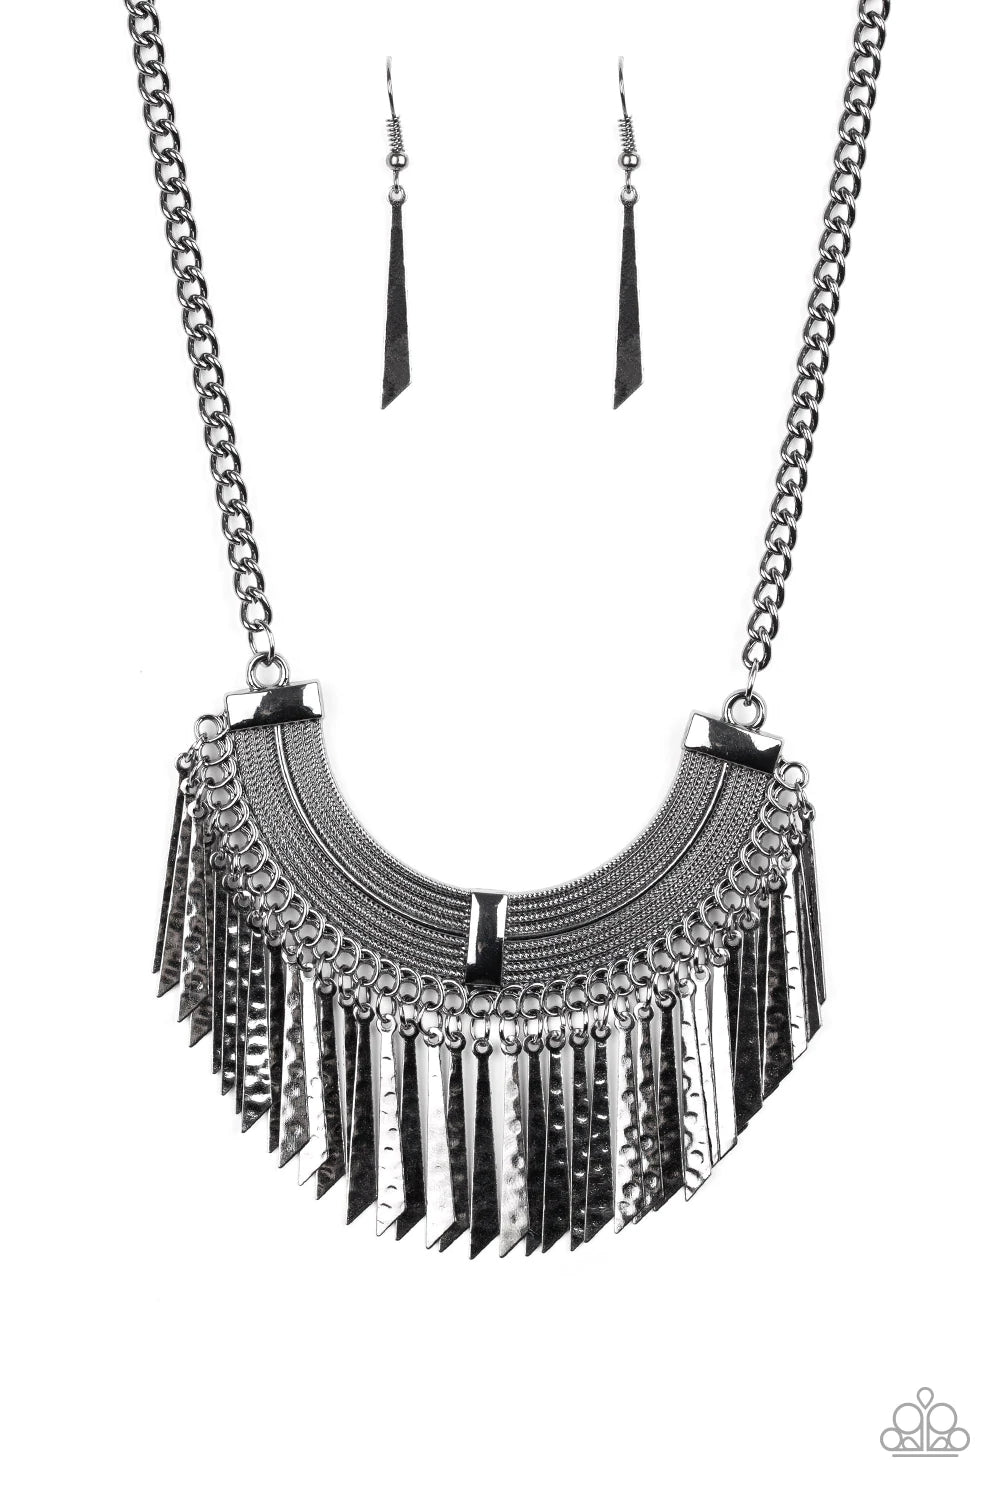 Be Adored Jewelry Impressively Incan Black Paparazzi Necklace 